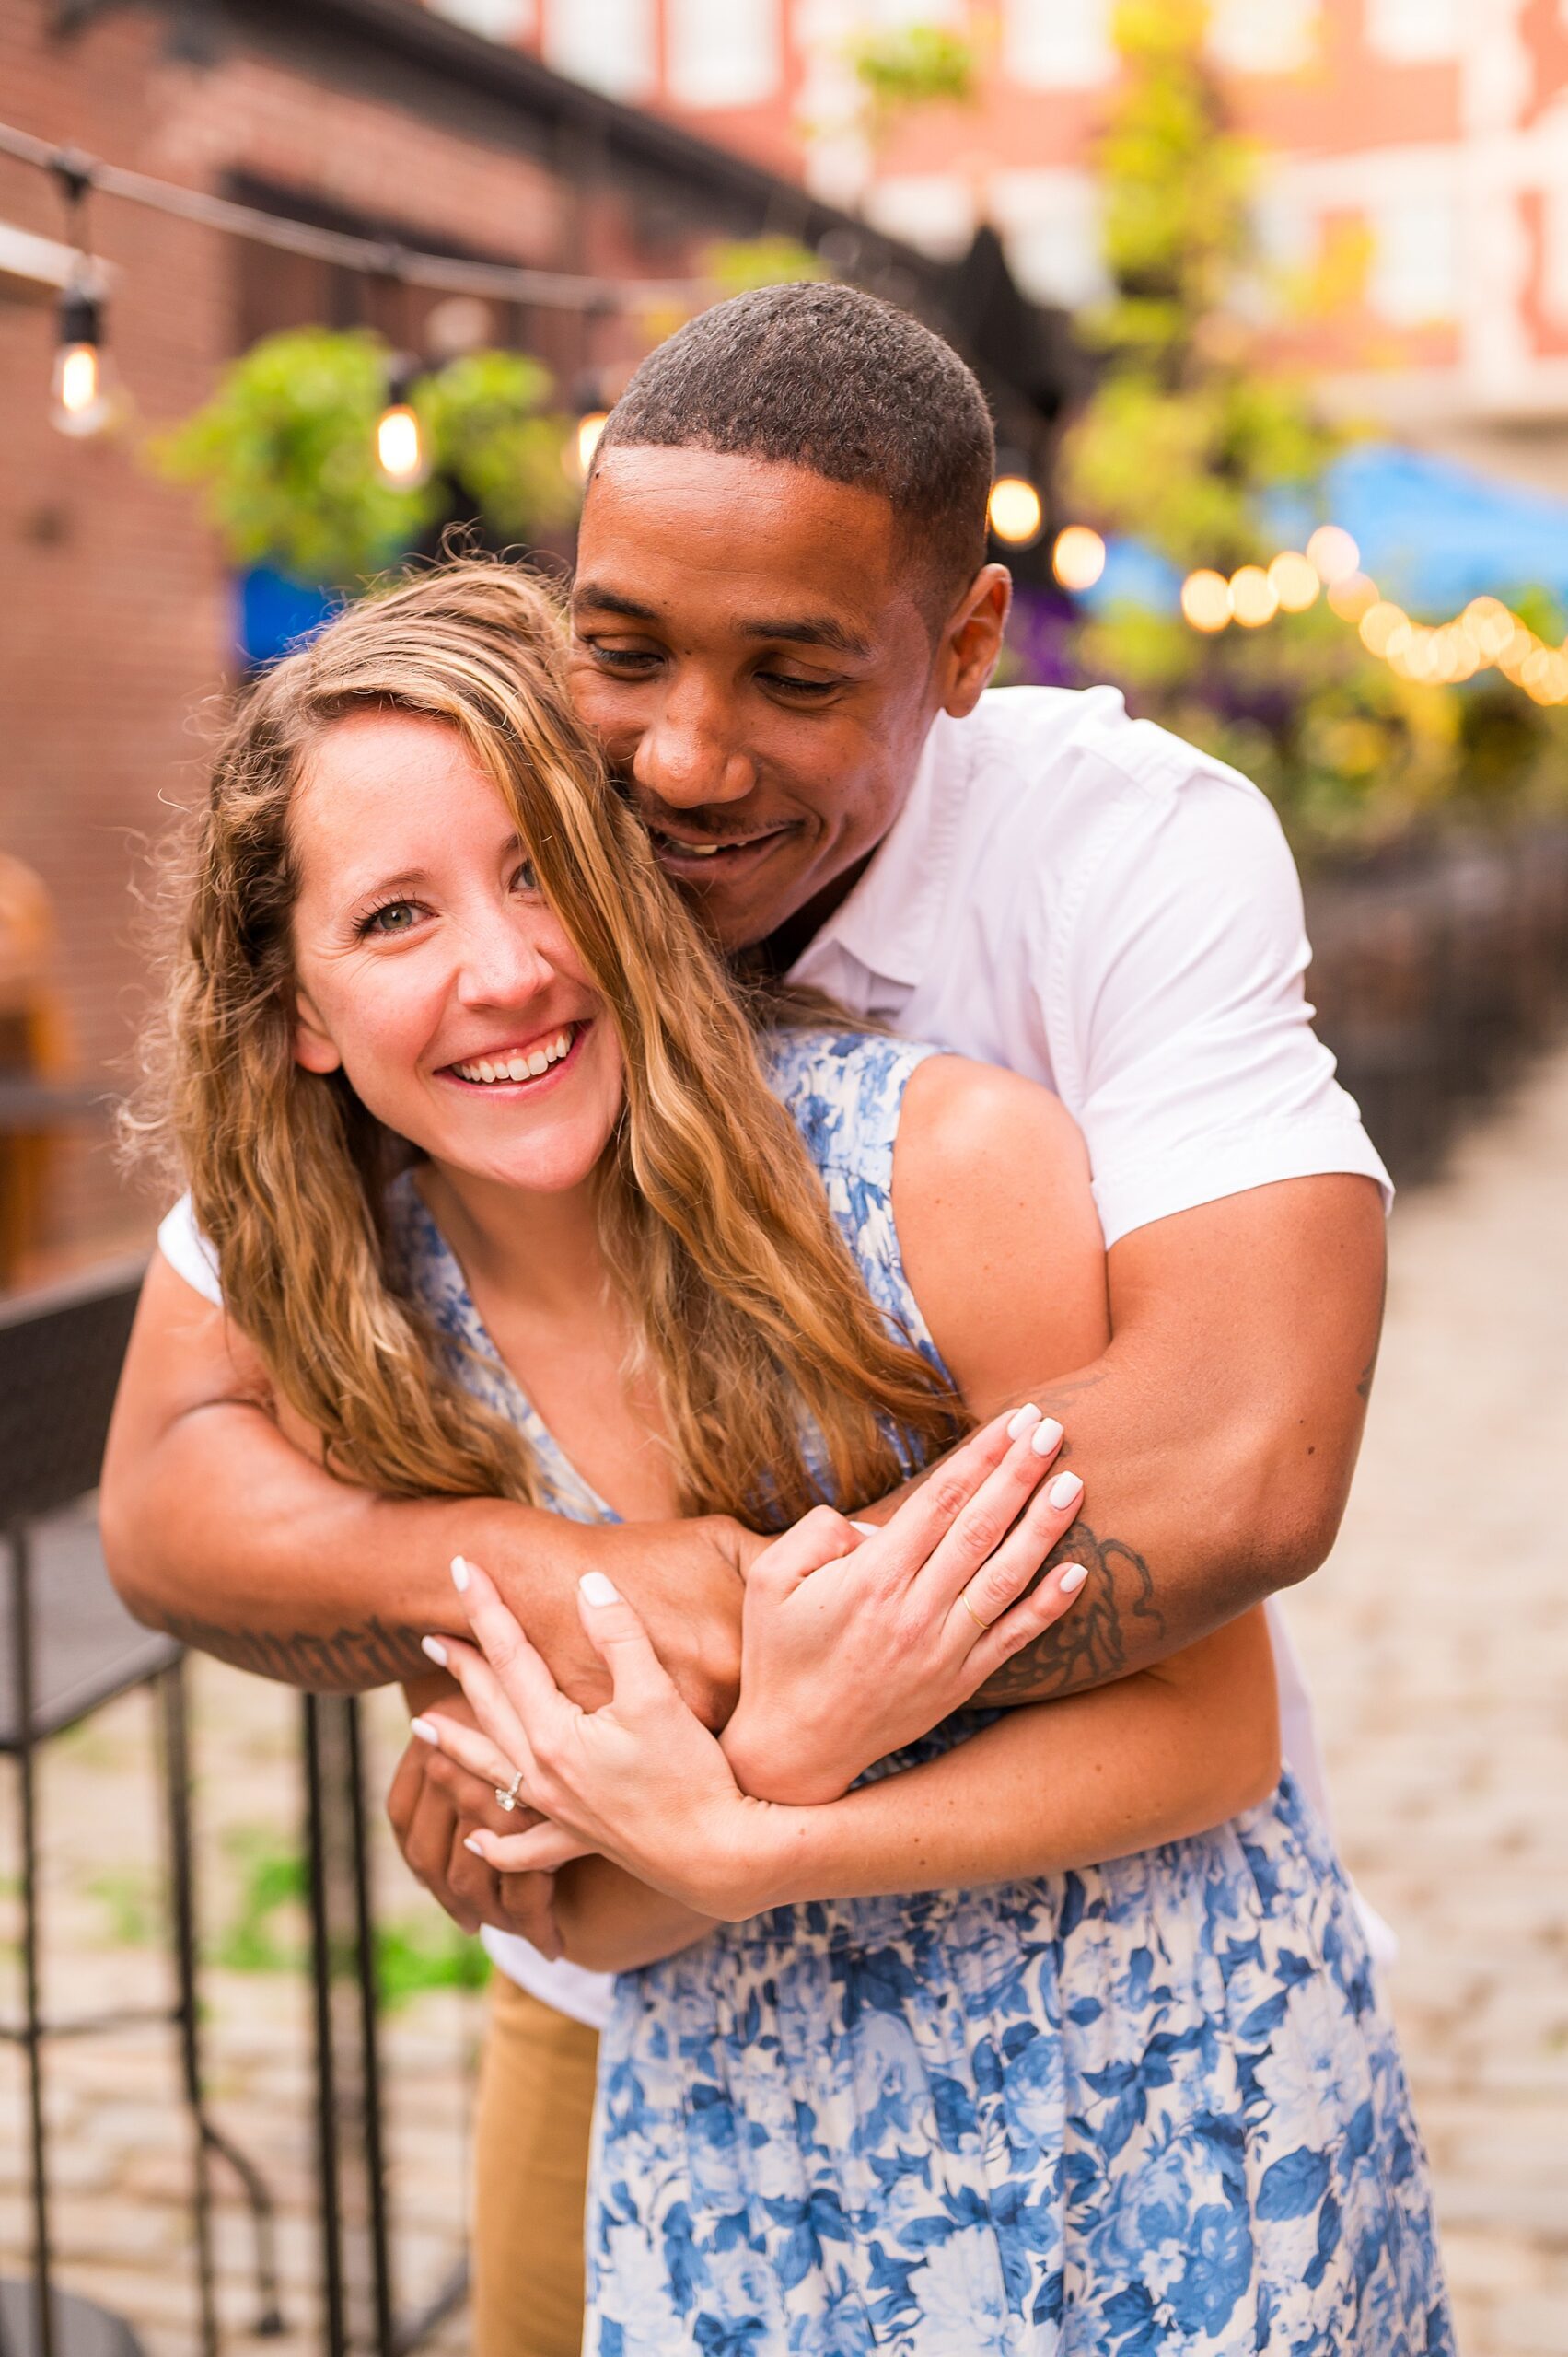 candid engagement portaits in New England town 